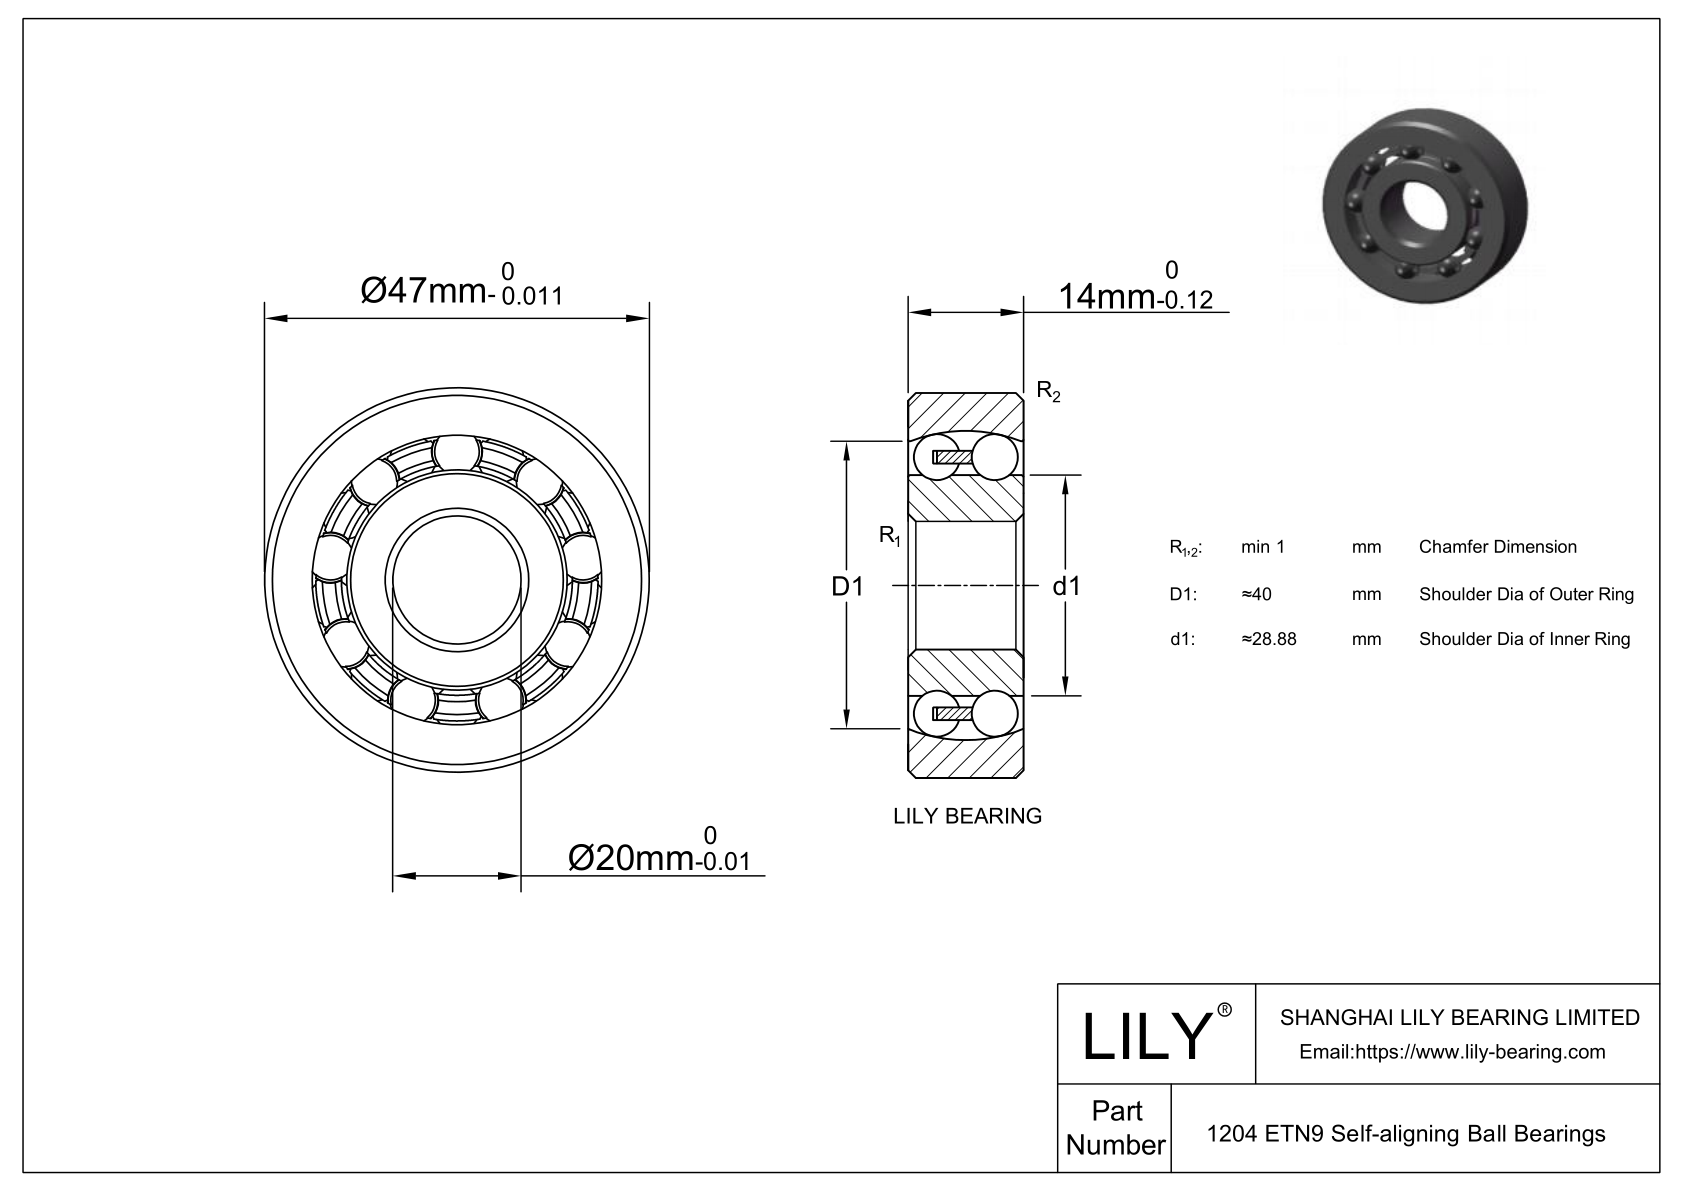 S1204 ETN9 Stainless Steel Self Aligning Ball Bearings cad drawing